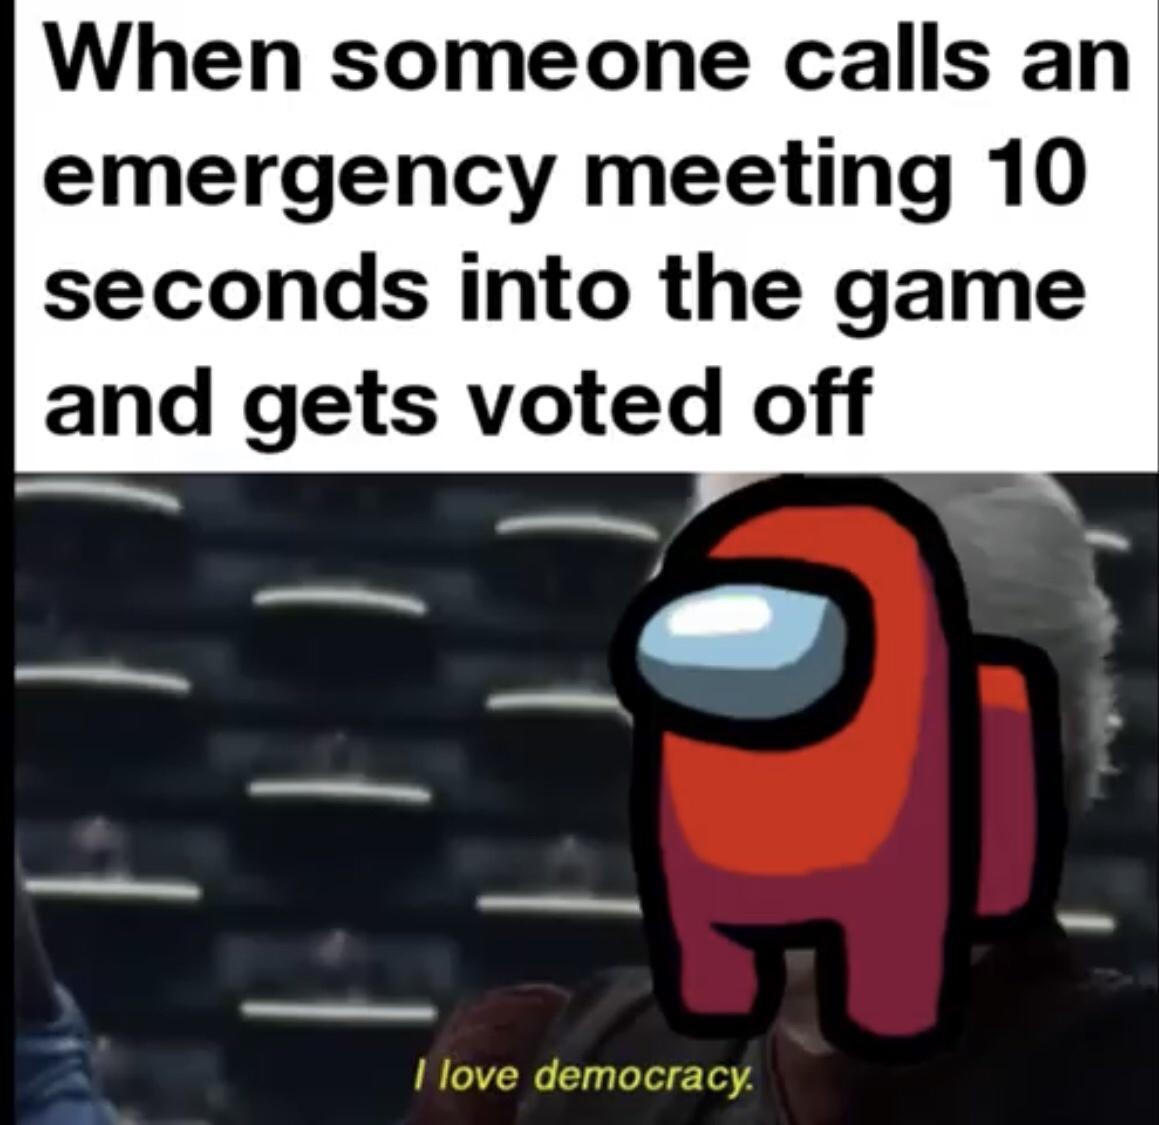 its friday - When someone calls an emergency meeting 10 seconds into the game and gets voted off F I love democracy.